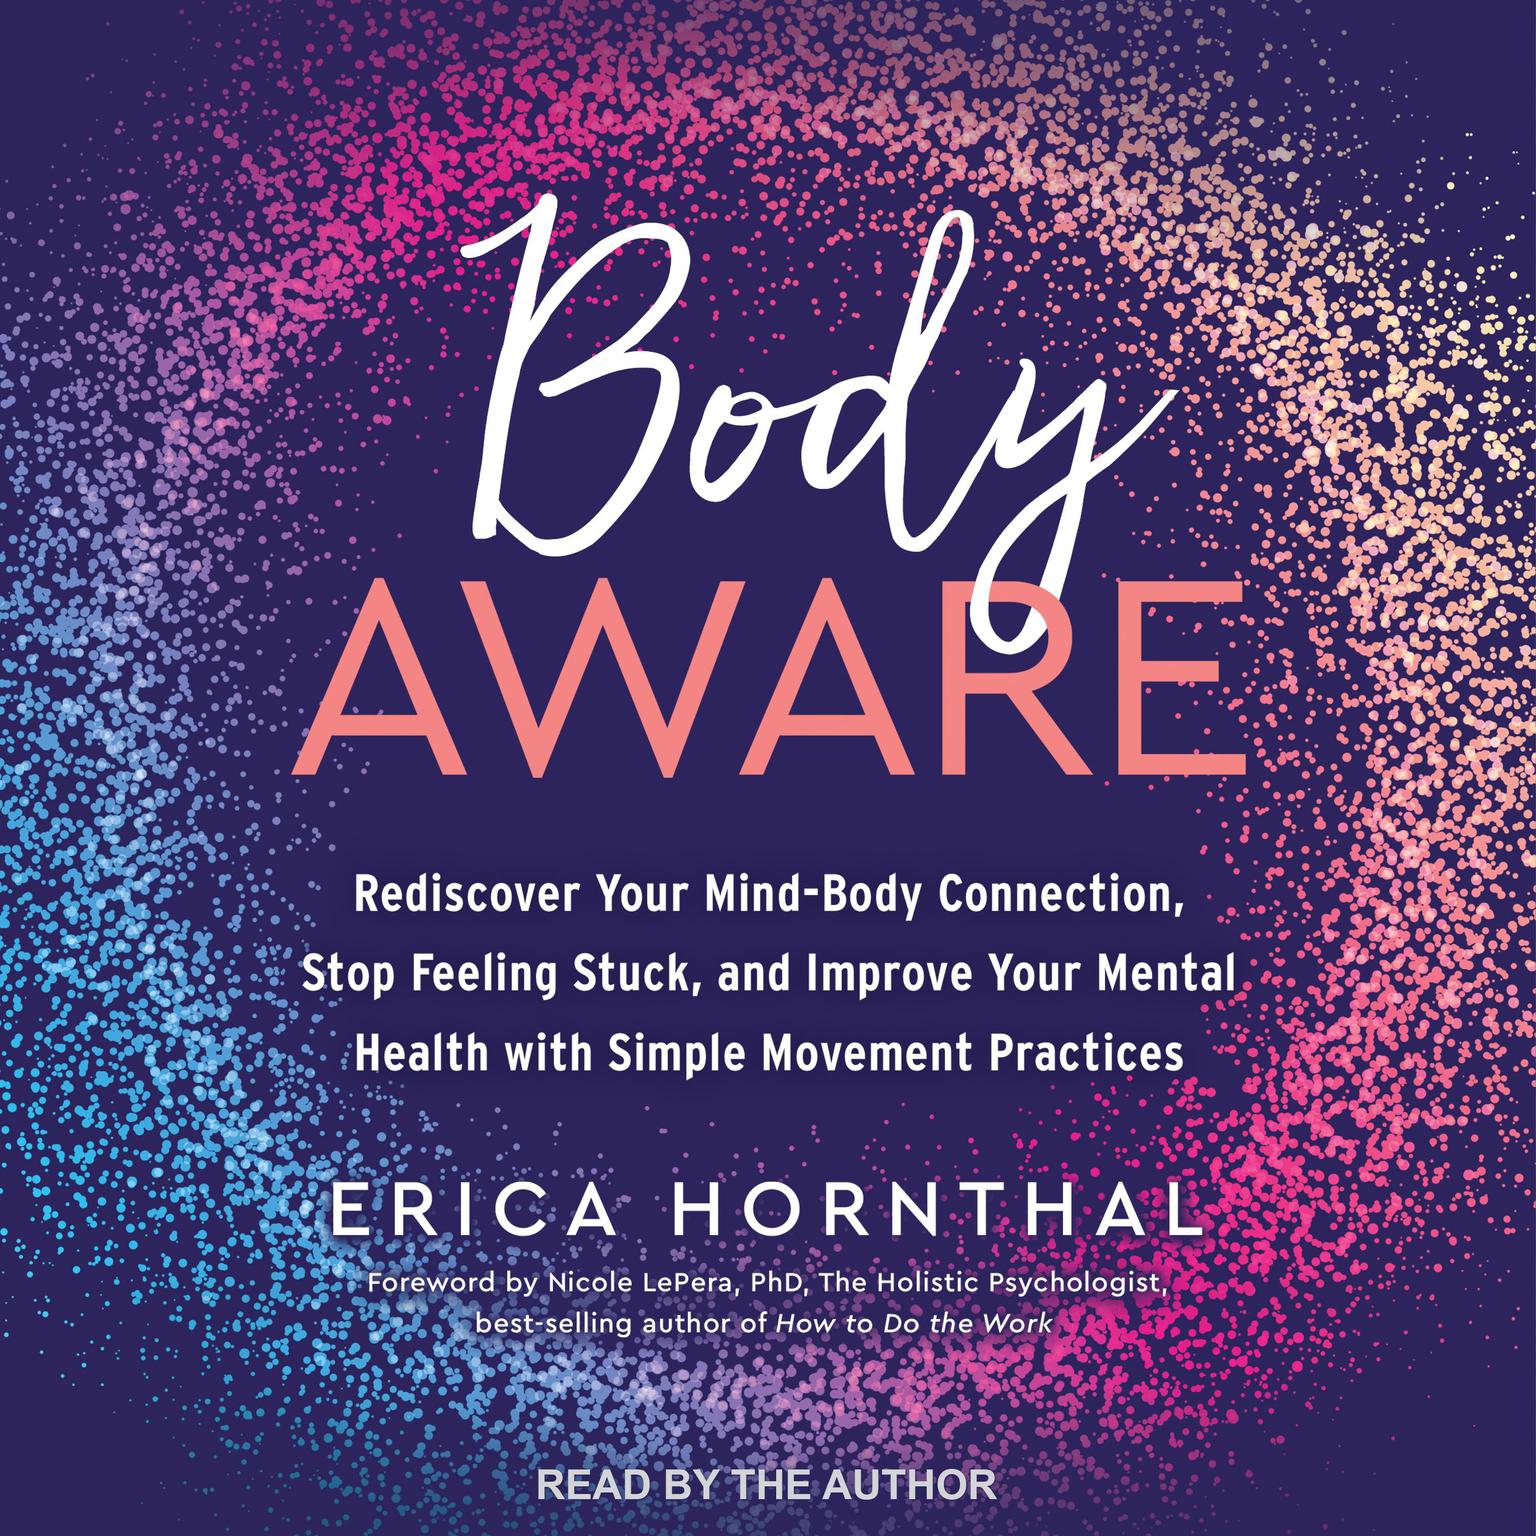 Body Aware: Rediscover Your Mind-Body Connection, Stop Feeling Stuck and Improve Your Mental Health With Simple Movement Practices Audiobook, by Erica Hornthal